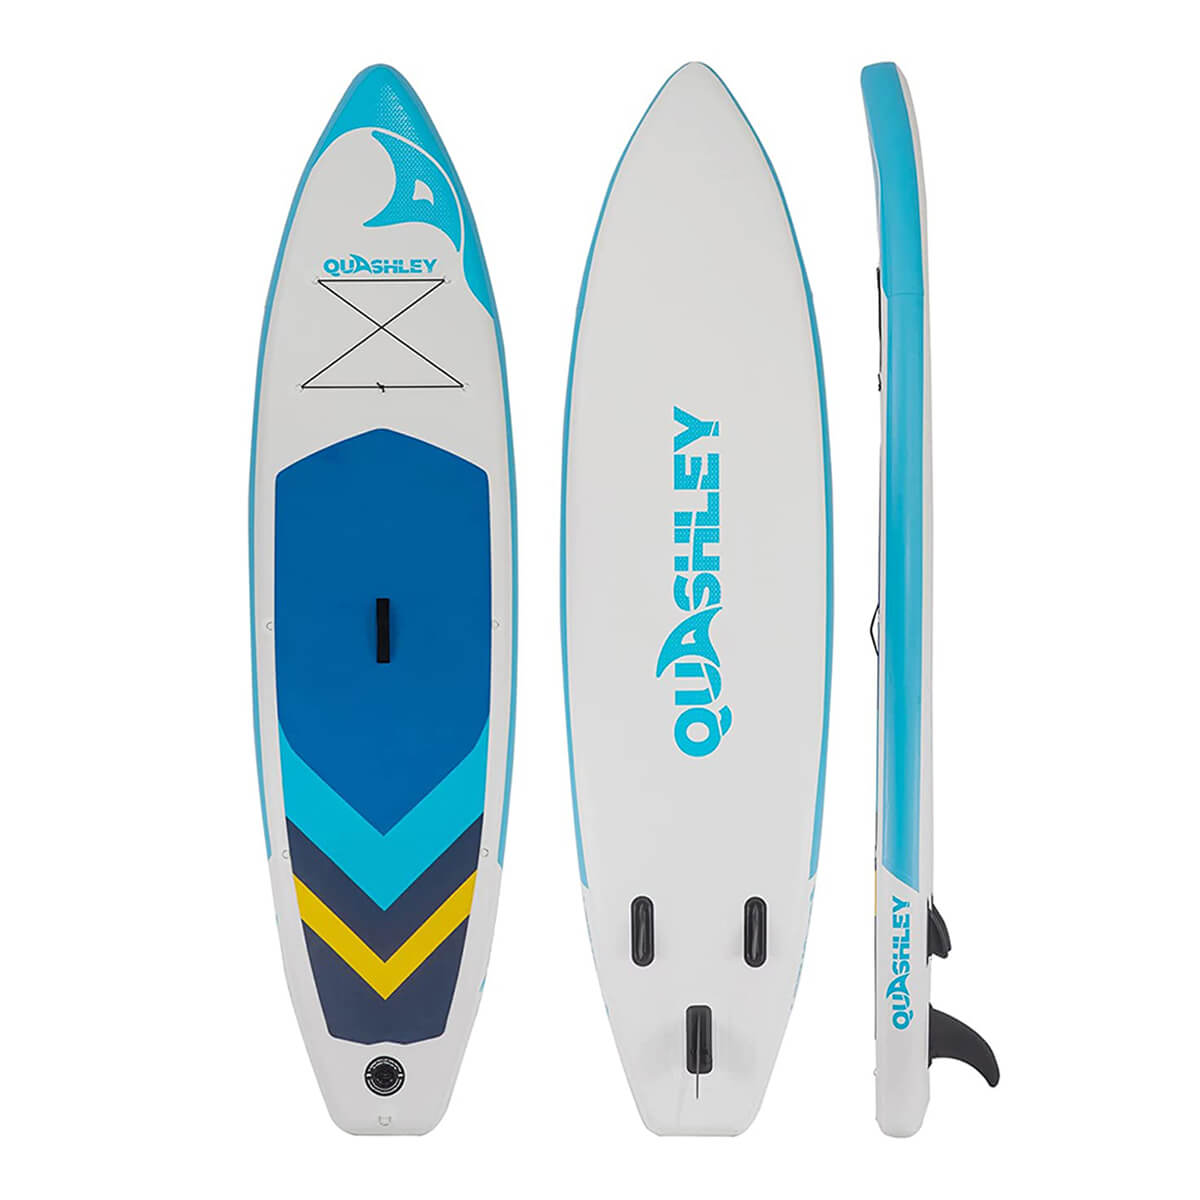 Quashley Inflatable Stand Up Paddle Board Accessories with Premium Surfboard SUP